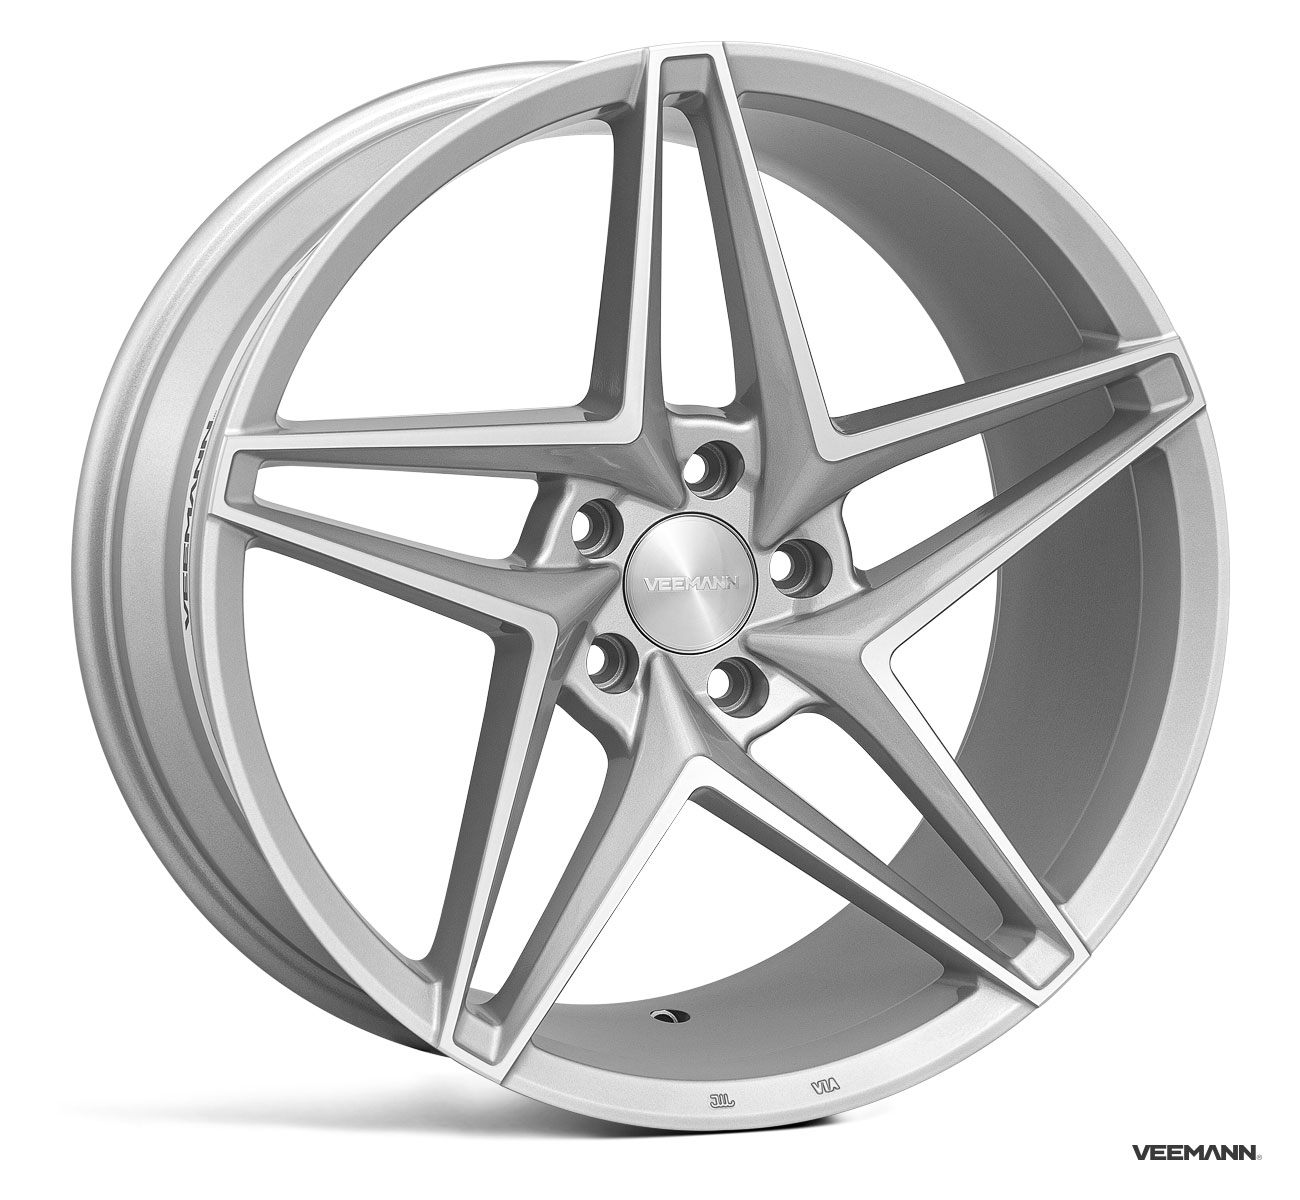 NEW 19" VEEMANN V-FS46 ALLOY WHEELS IN SILVER POL WITH WIDER 9.5" REARS